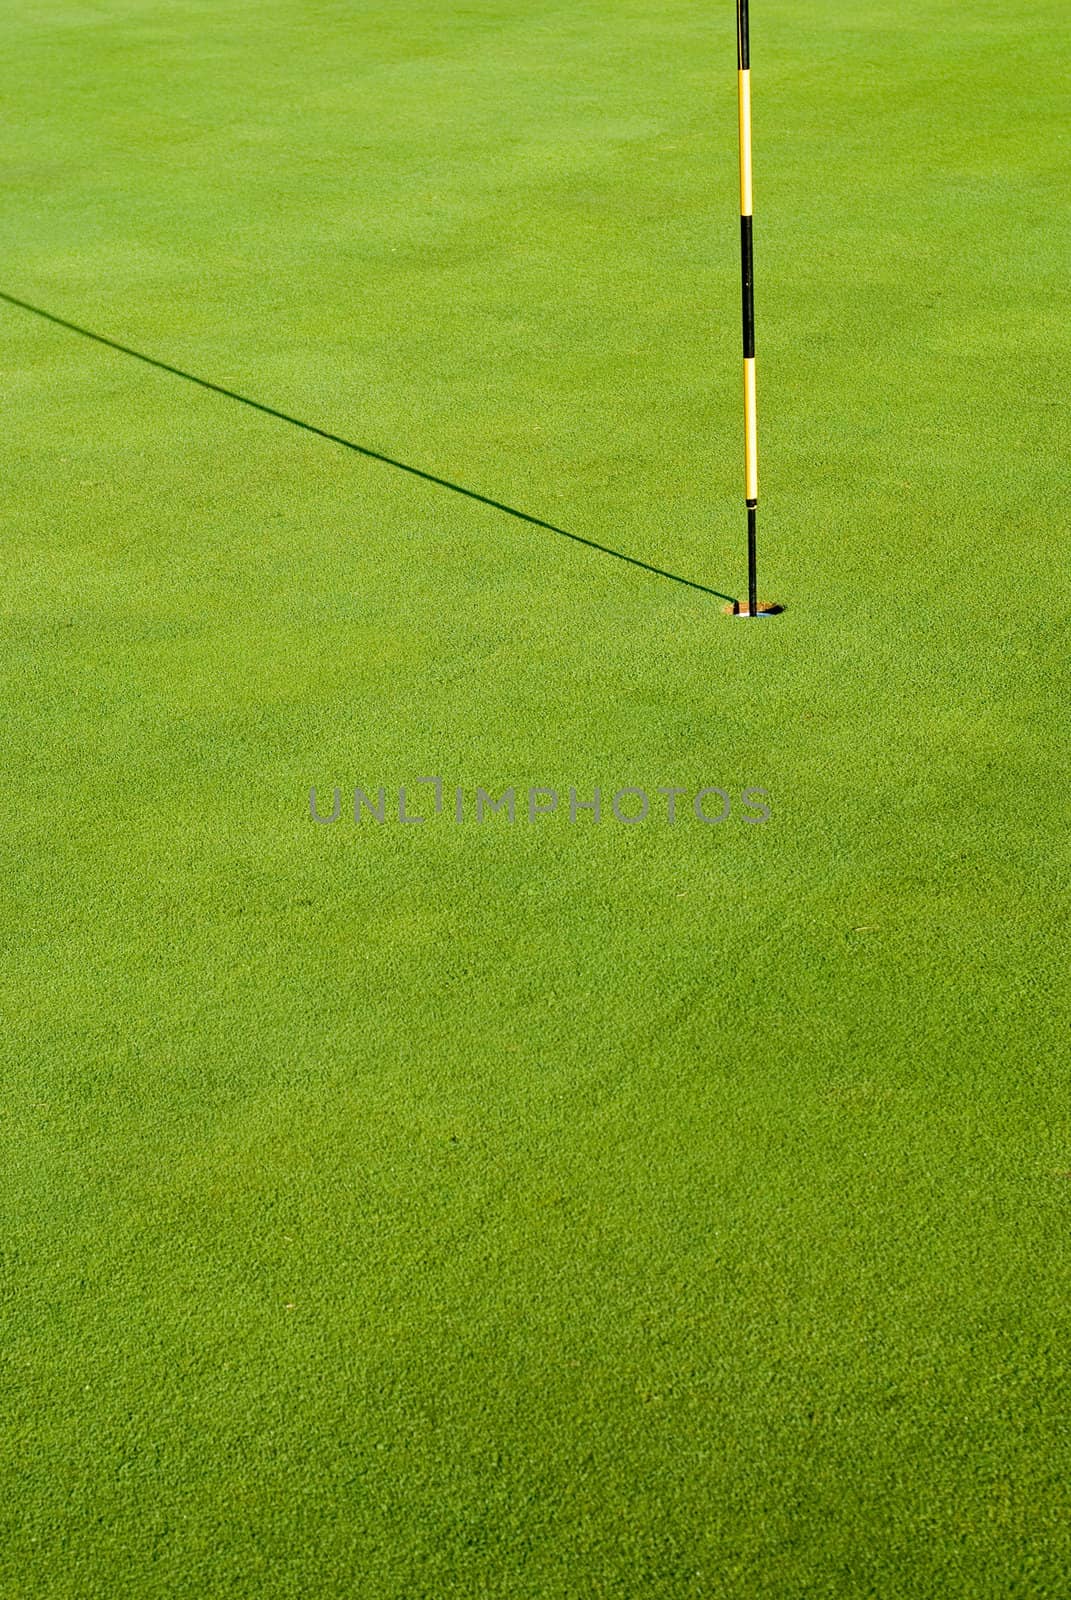 Flag and hole by alistaircotton